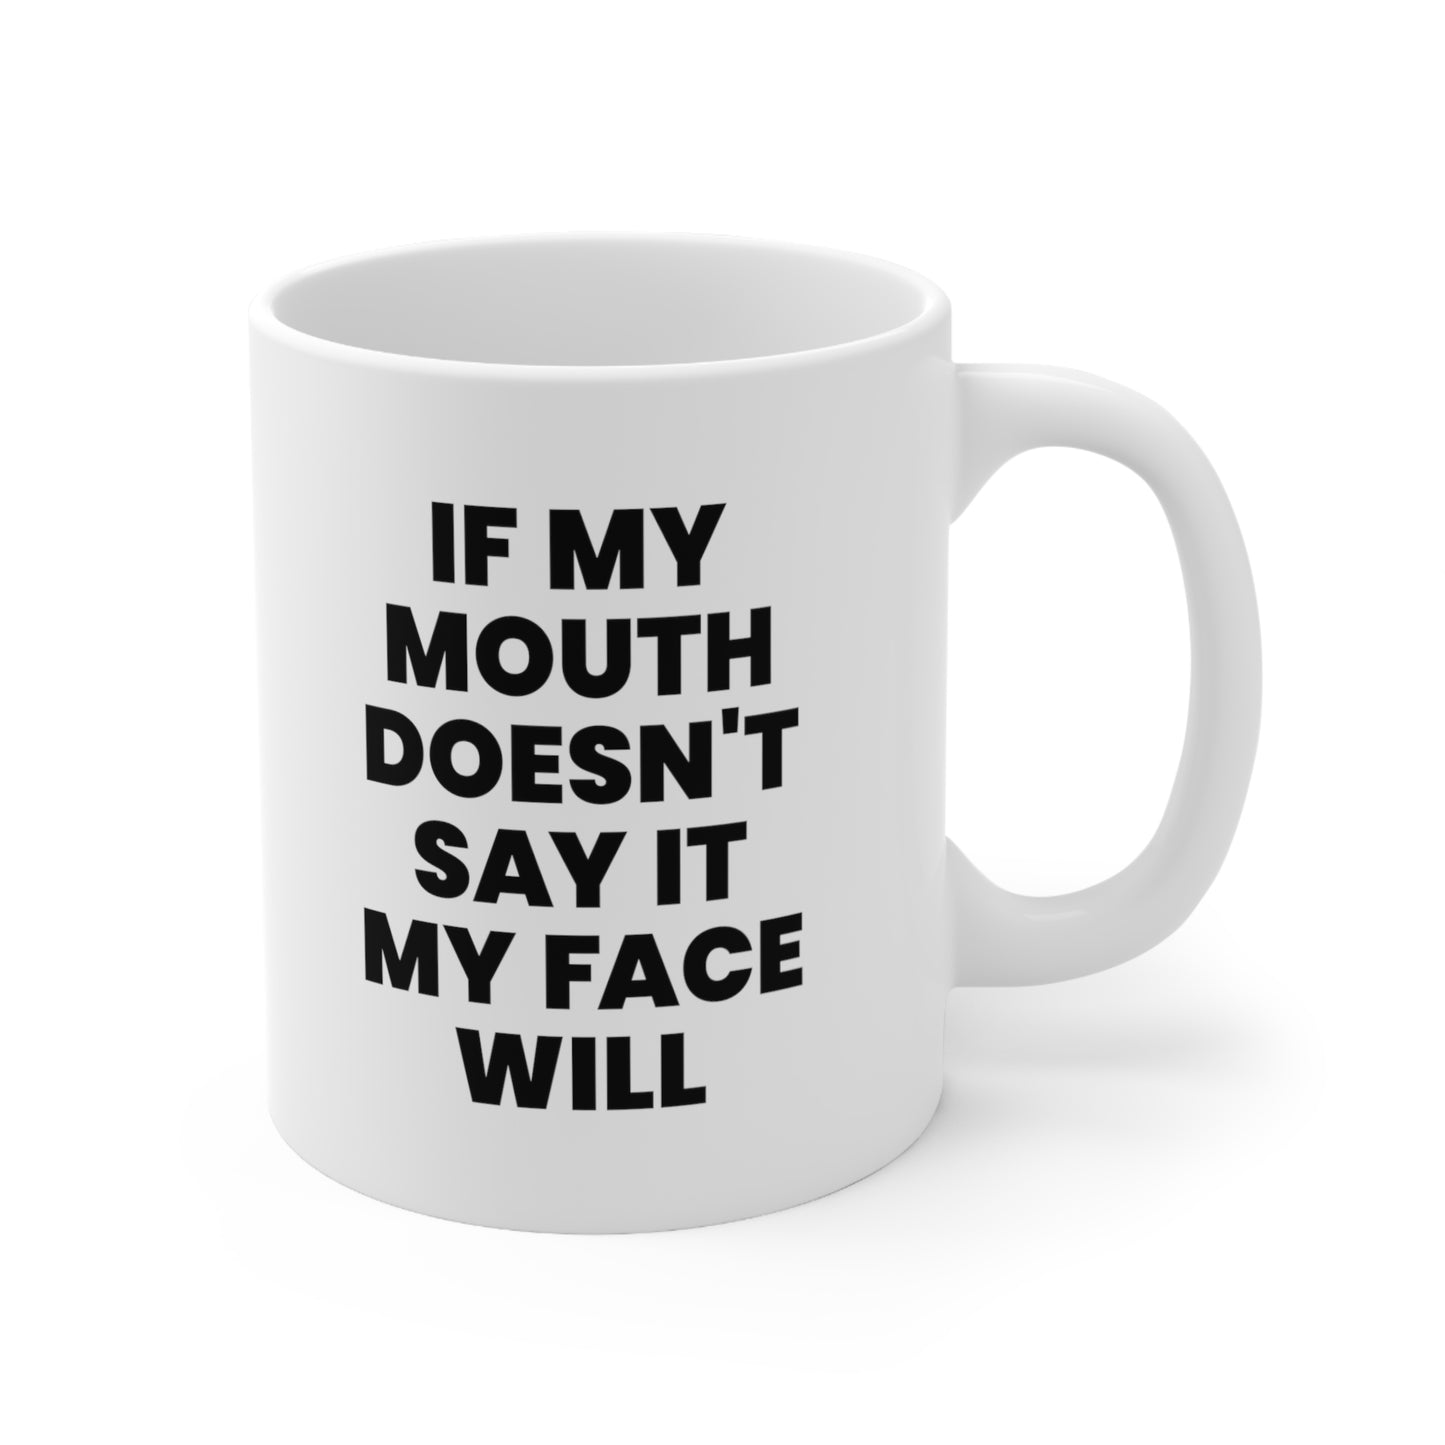 If my mouth doesn't say it my face will Coffee Mug 11oz